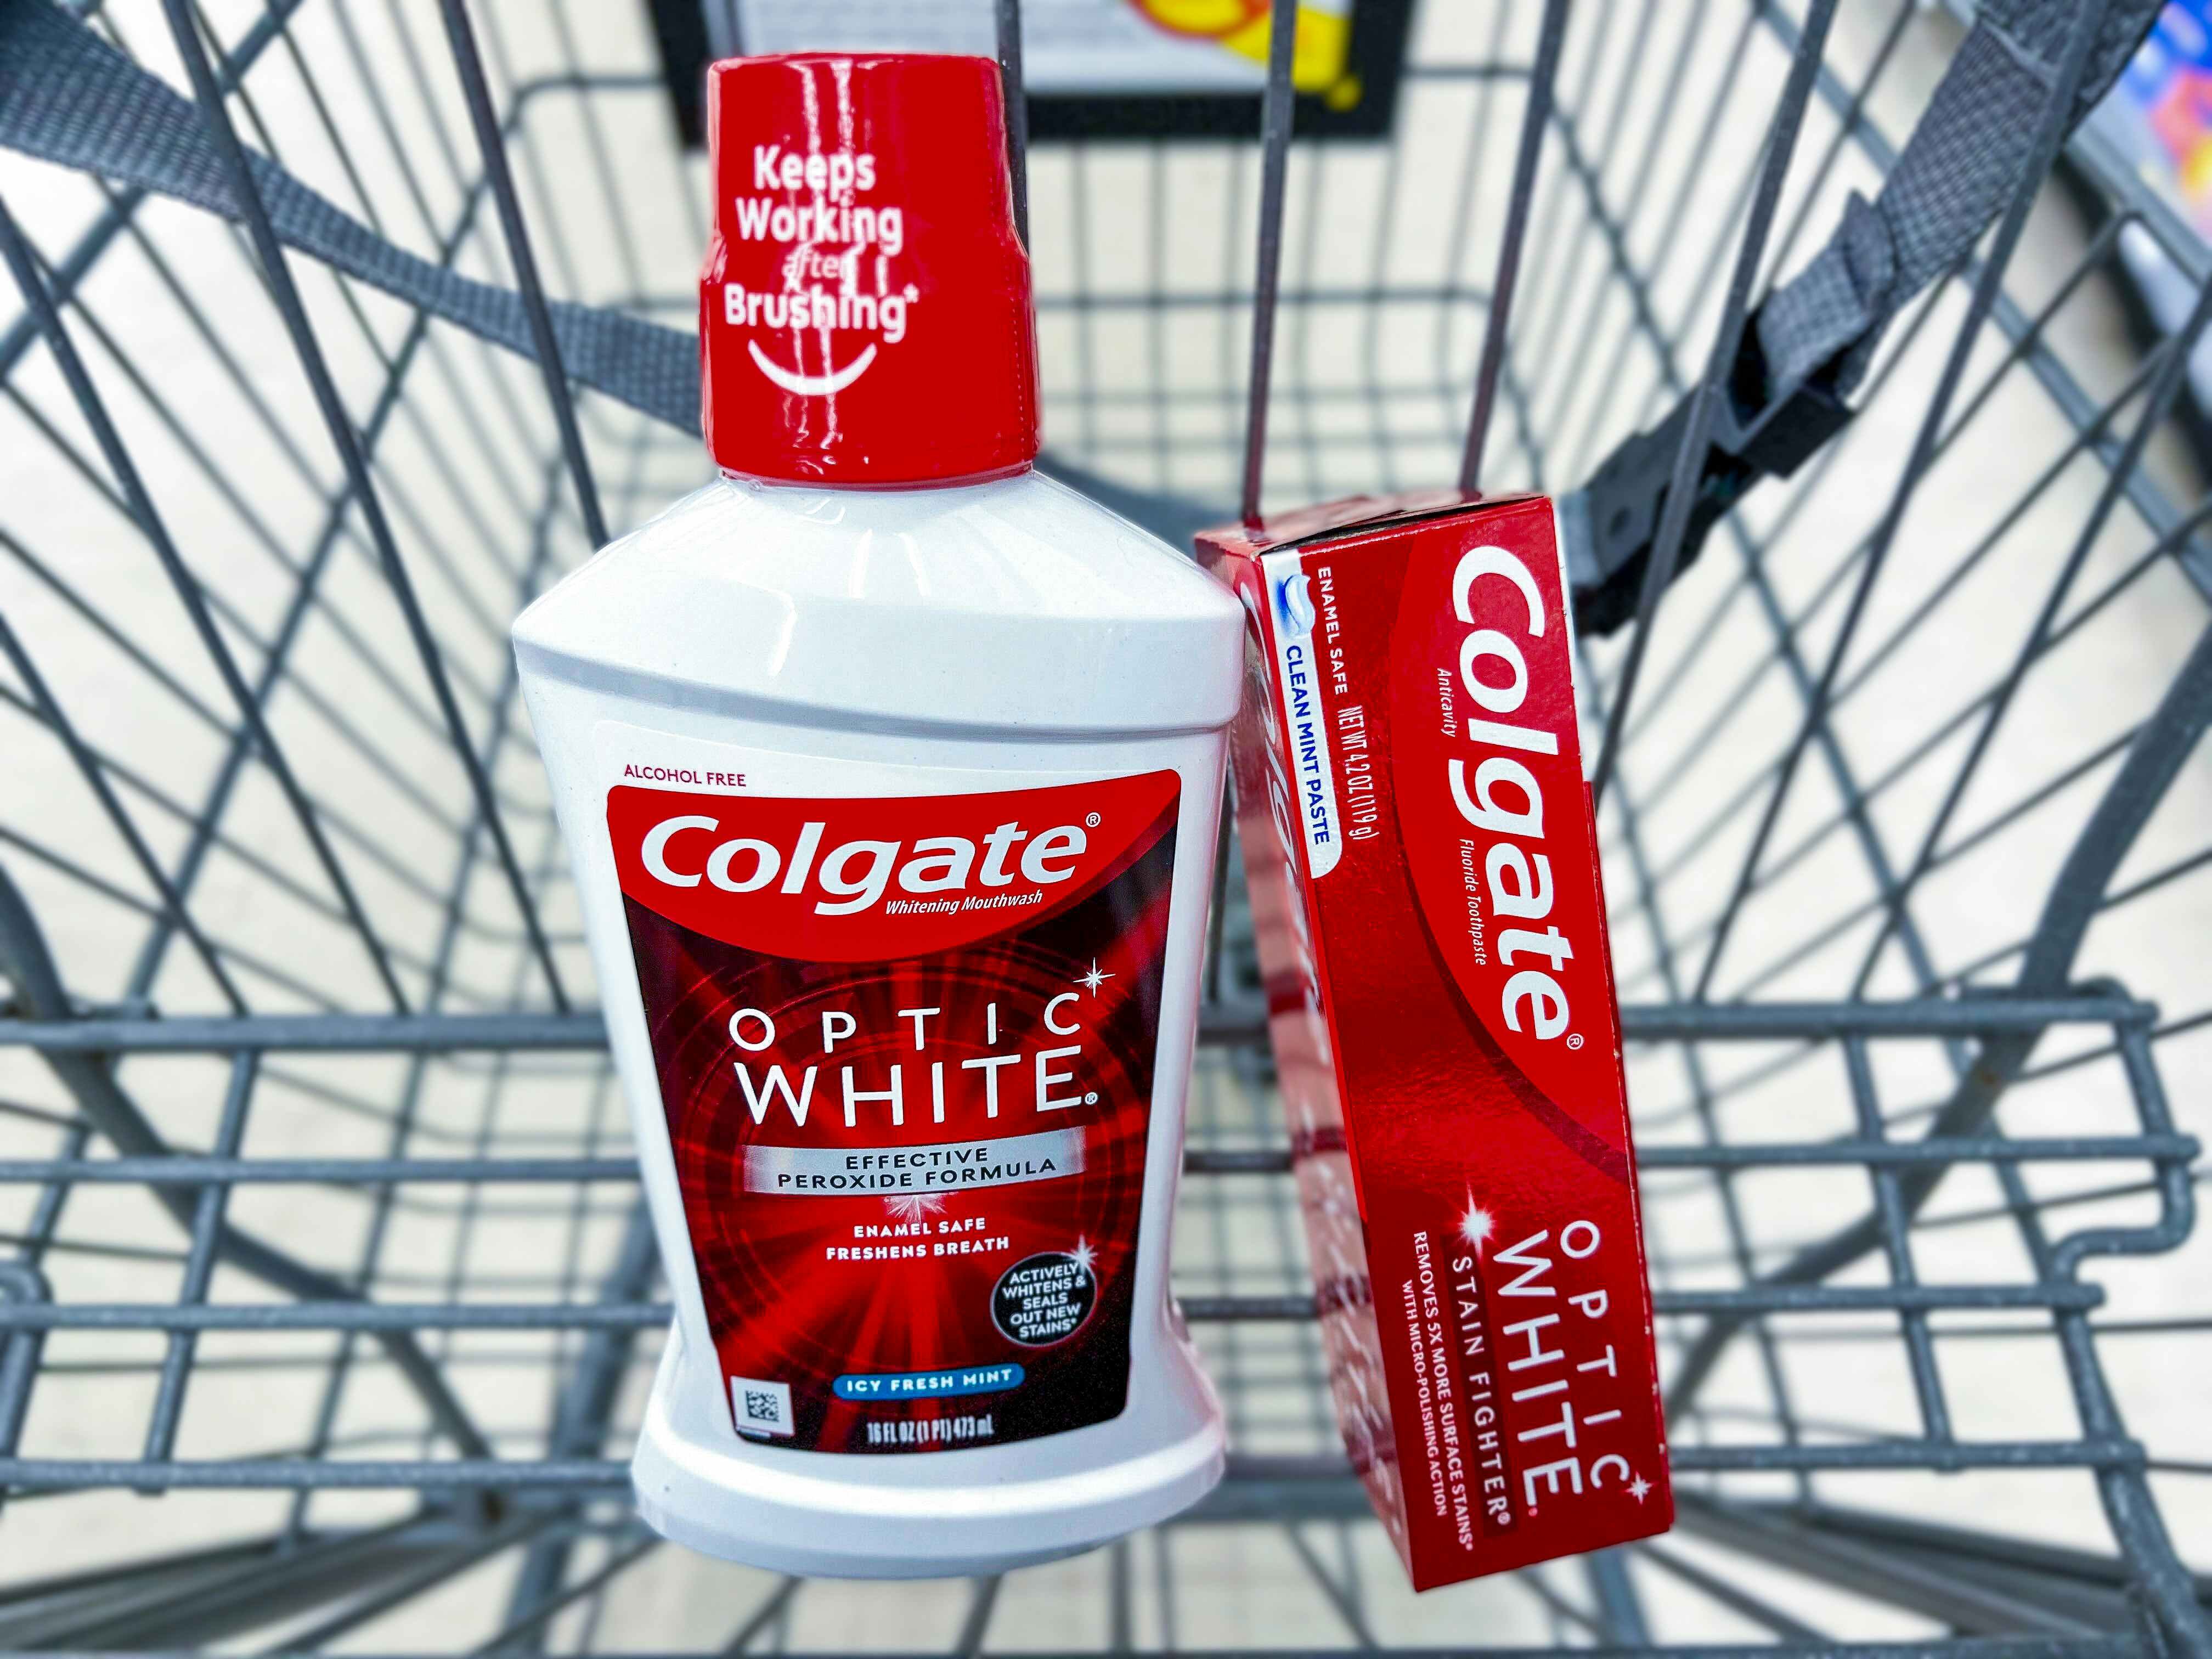 a tube of colgate toothpaste and a bottle of colgate mouthwash